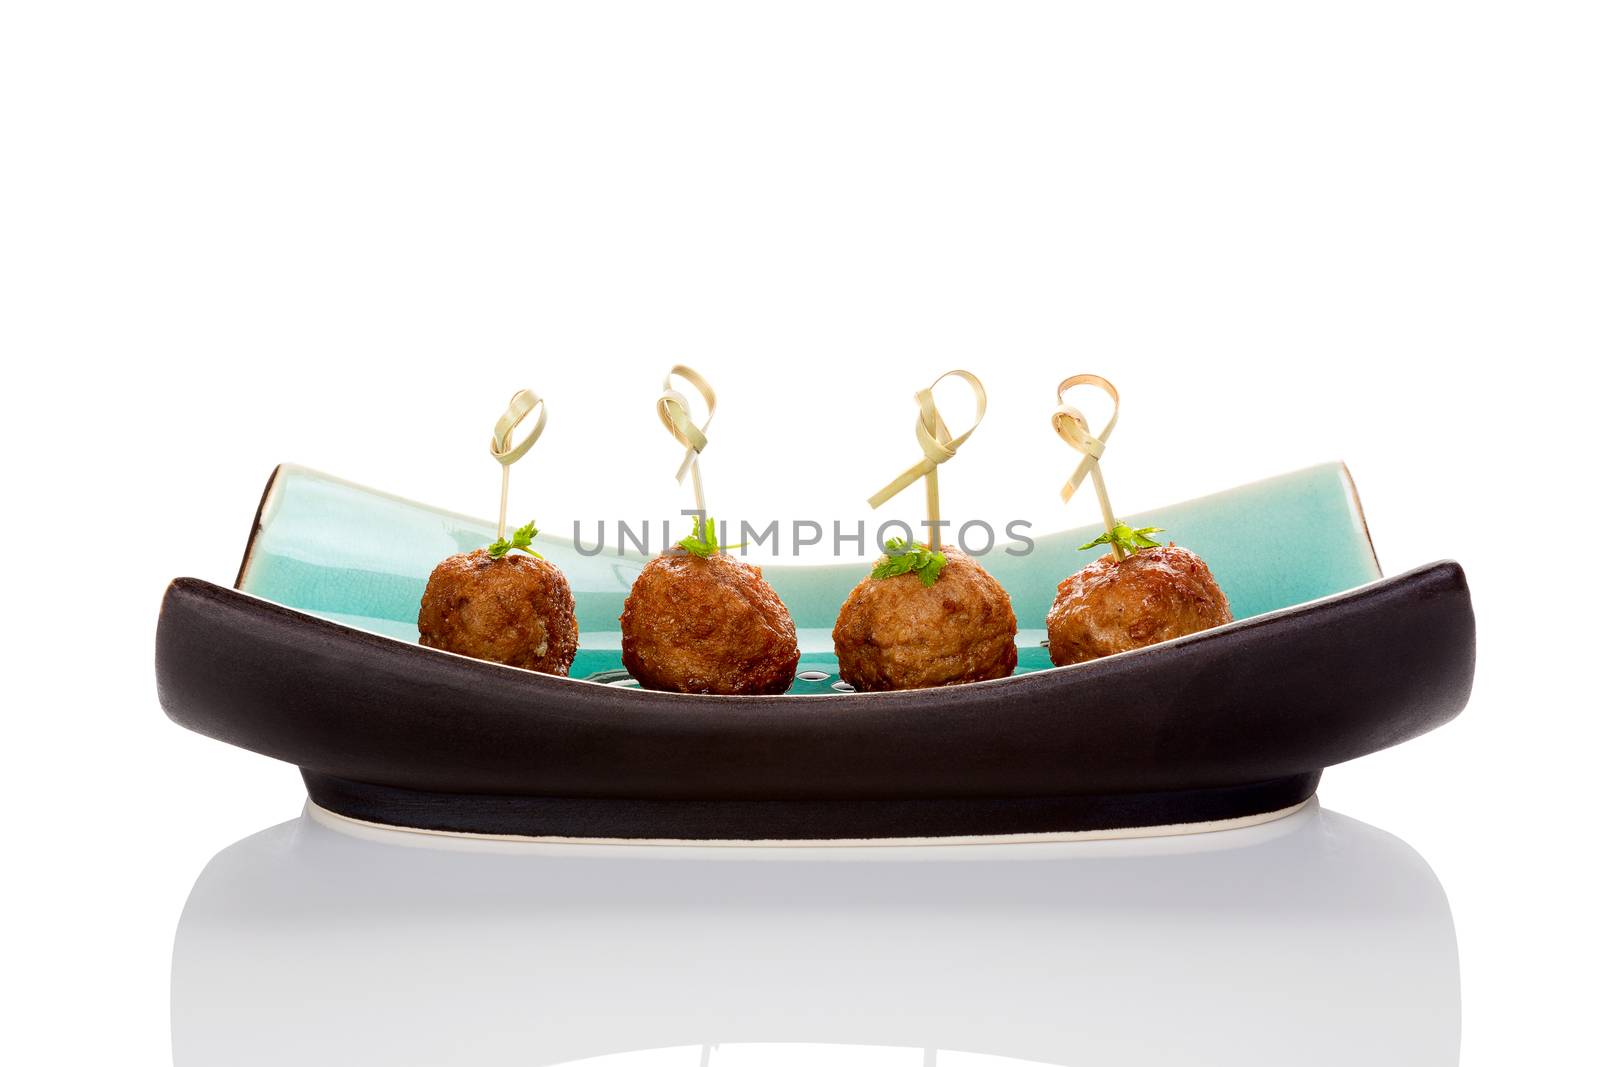 Meatballs canape on ceramic tray isolated on white background. Culinary bbq eating. 